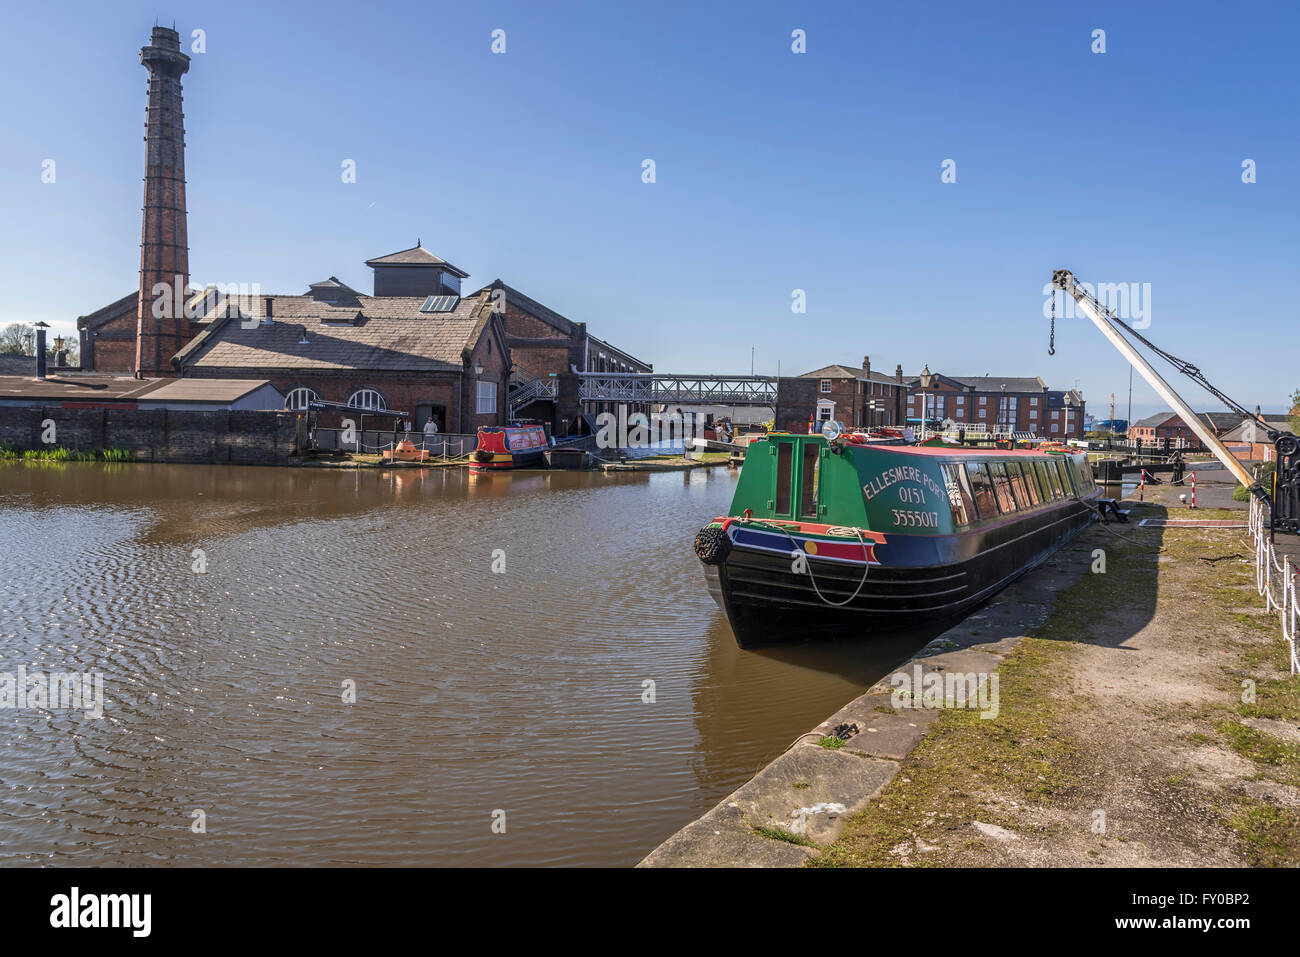 The National Waterways Museum is located in Ellesmere Port, Cheshire, England, Stock Photo